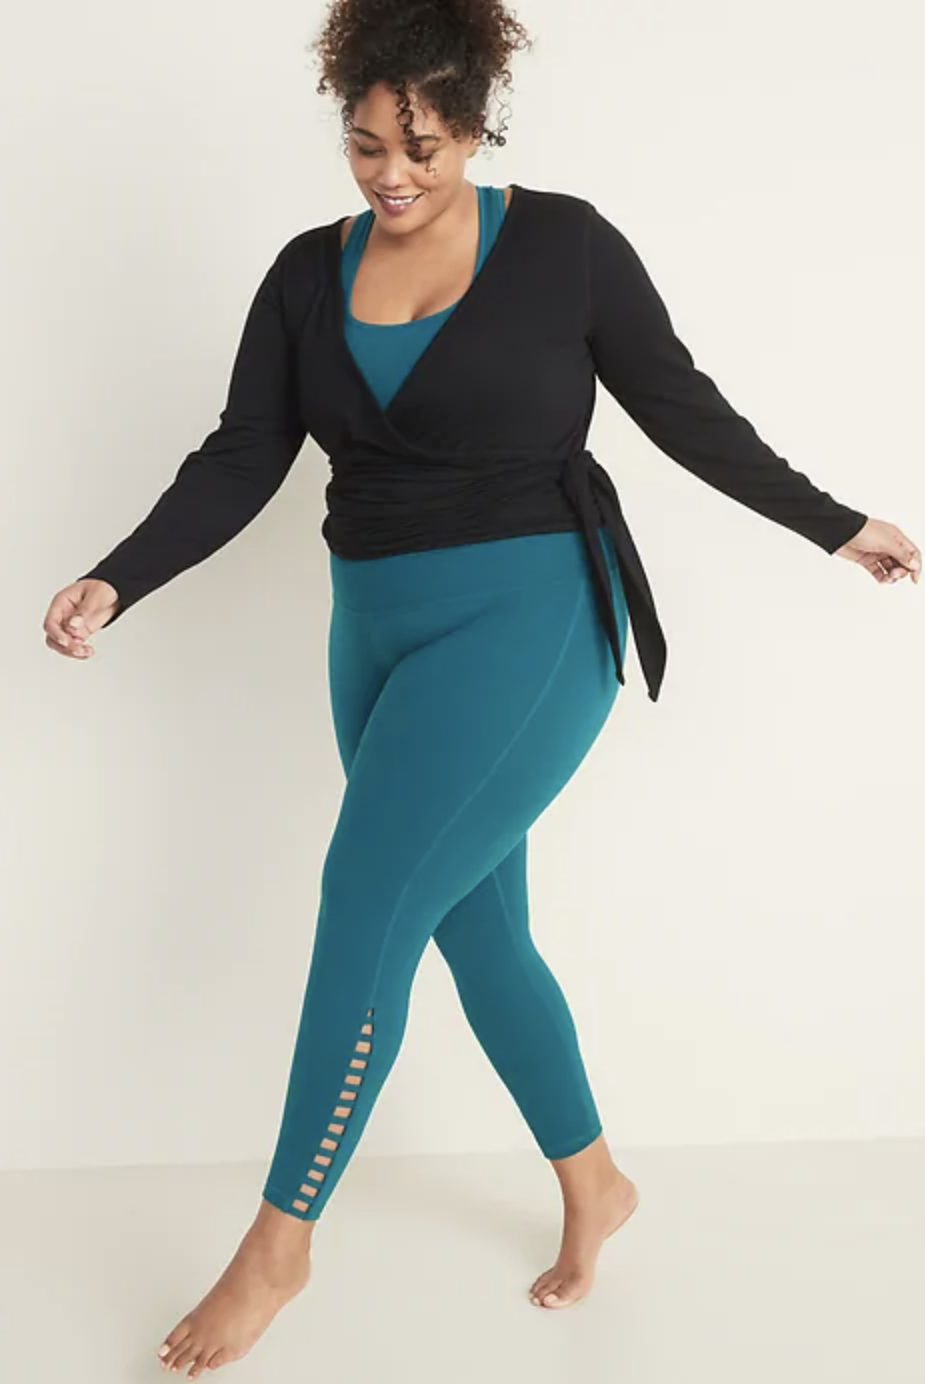 The Best Yoga Outfits for Women of all Shapes and Sizes - The Yoga